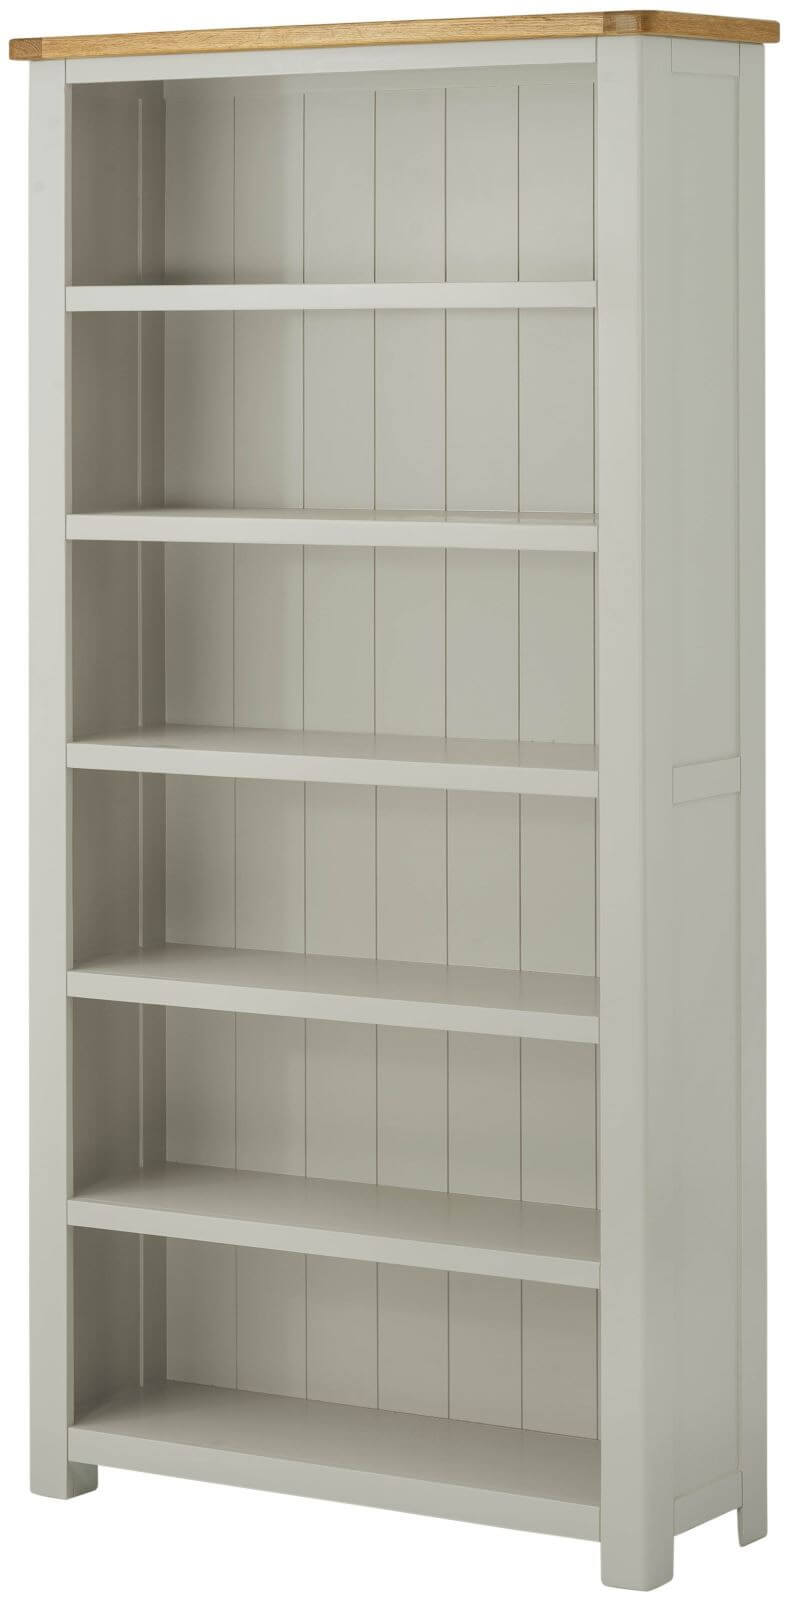 Showing image for Large seattle bookcase - stone